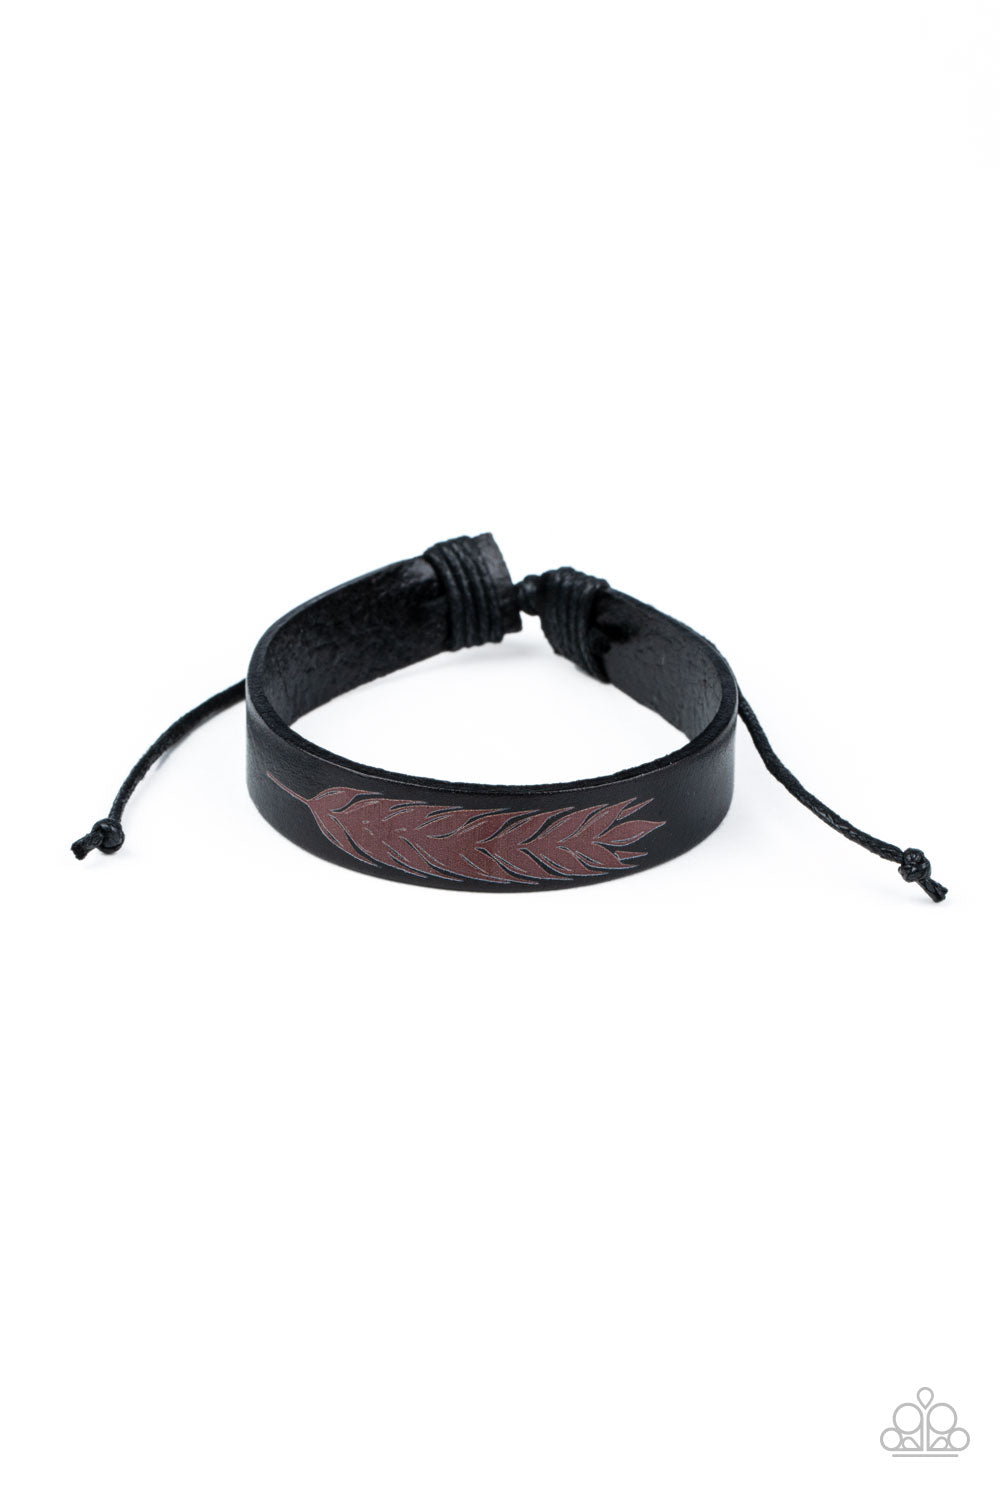 Paparazzi - This QUILL All Be Yours - Black Bracelet